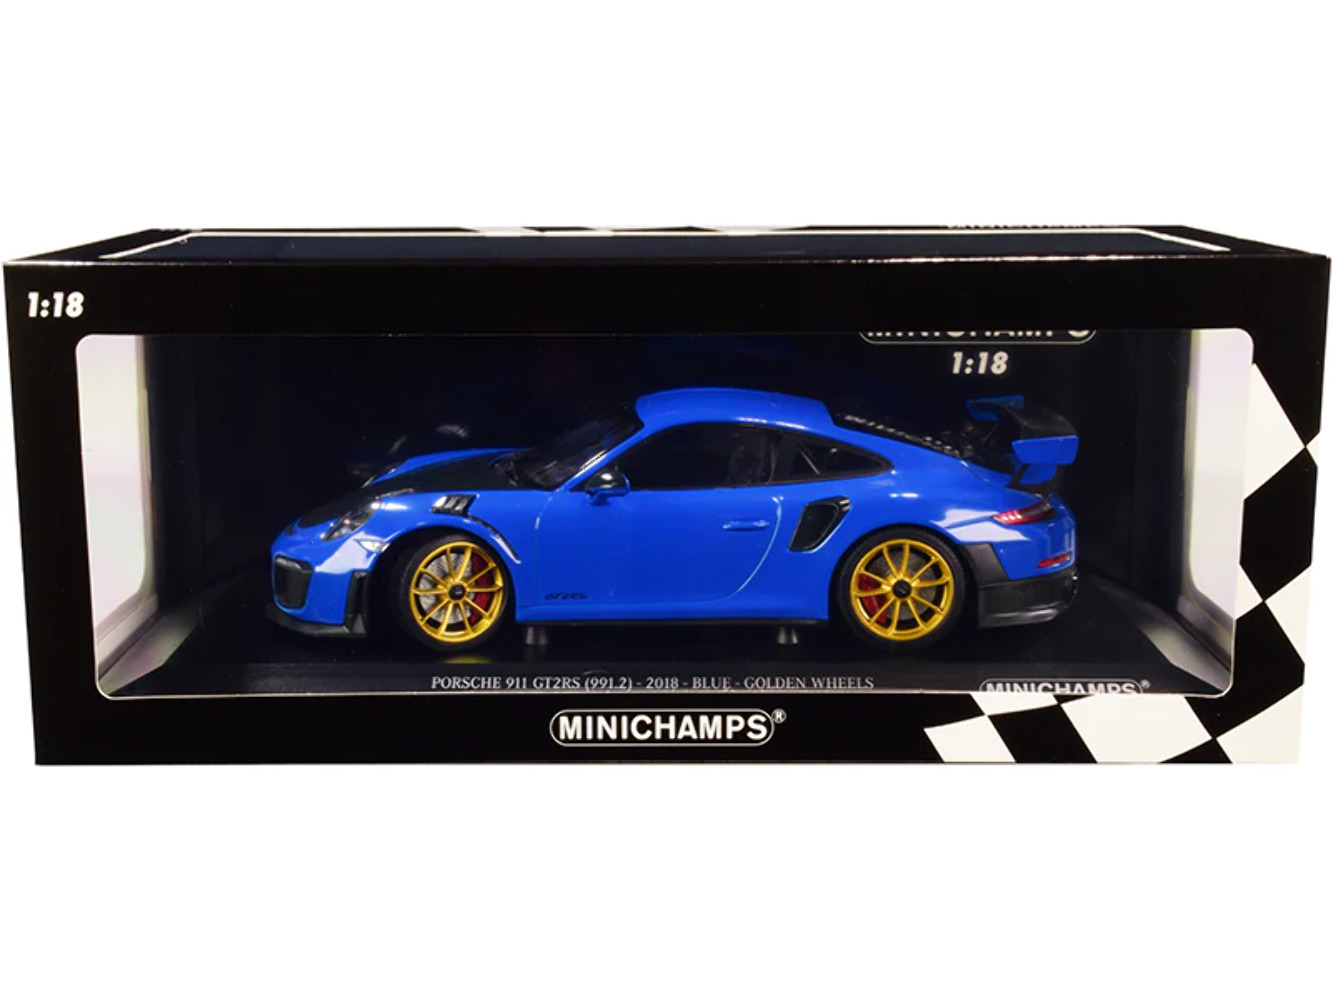 2018 Porsche 911 GT2RS (991.2) Blue with Carbon Hood and Golden Wheels Limited E